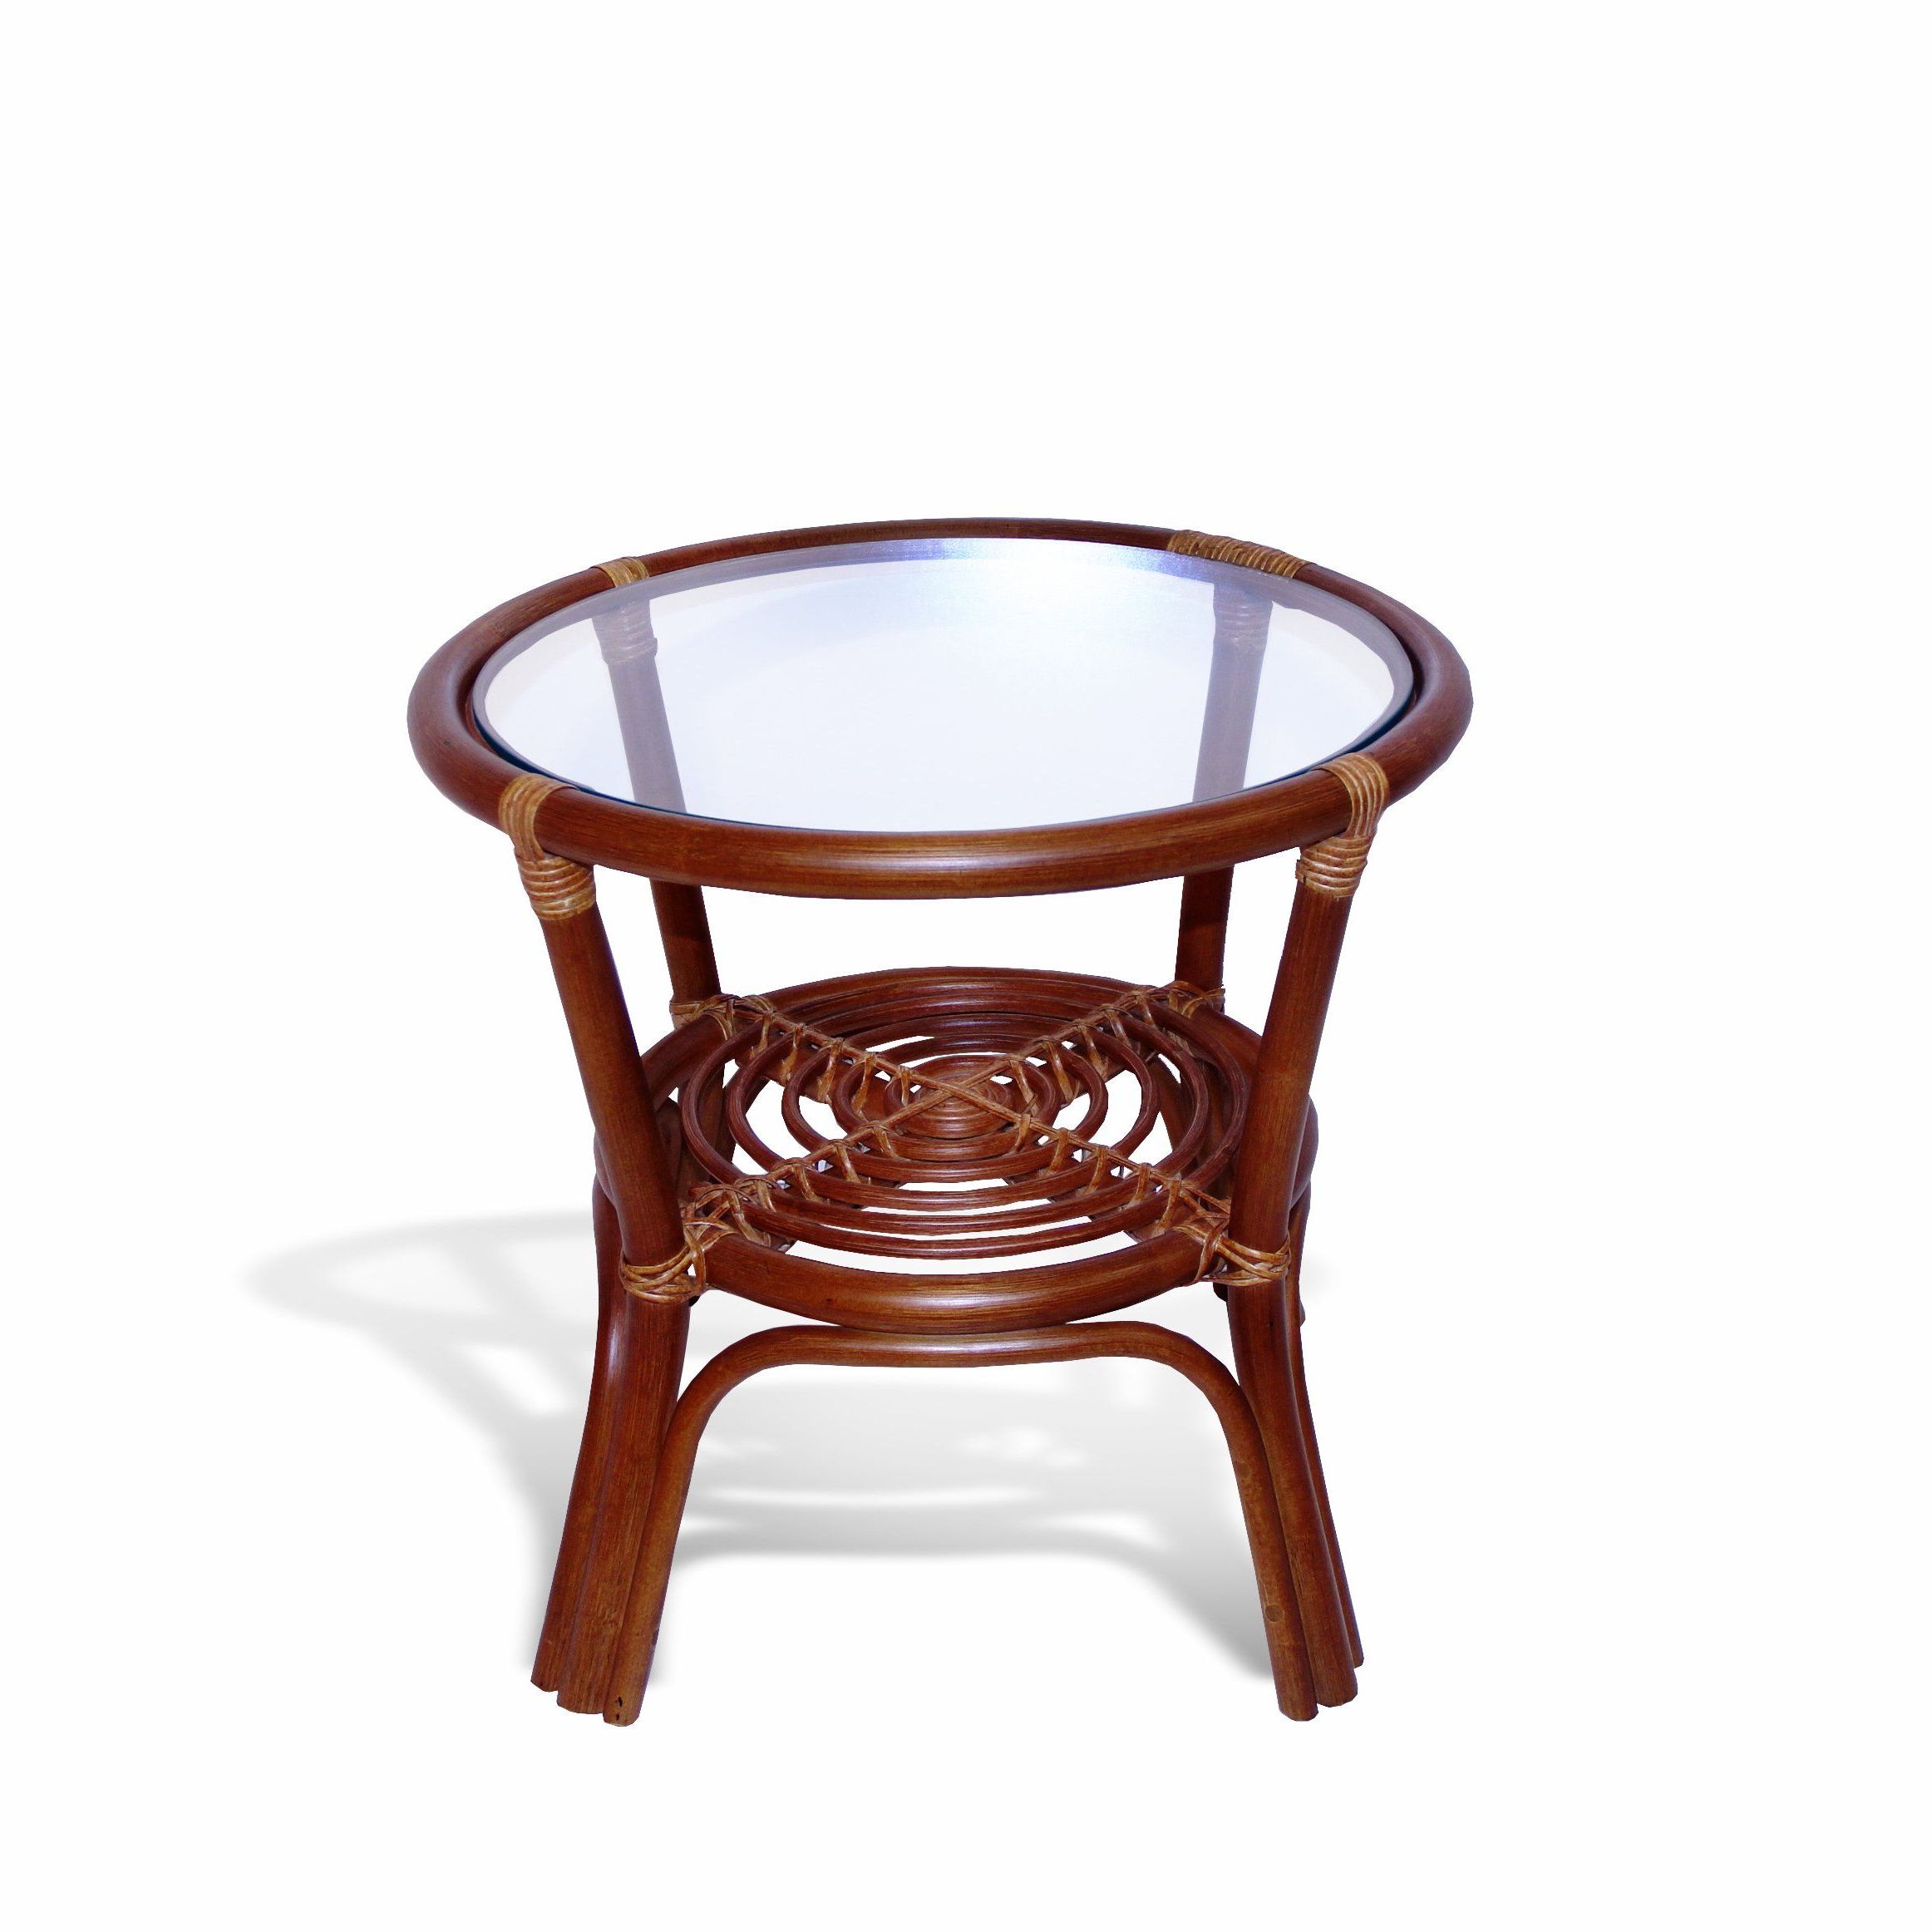 Round Coffee Table W/ Glass Top Natural Rattan Wicker Eco With Latest Natural Woven Banana Coffee Tables (View 14 of 20)